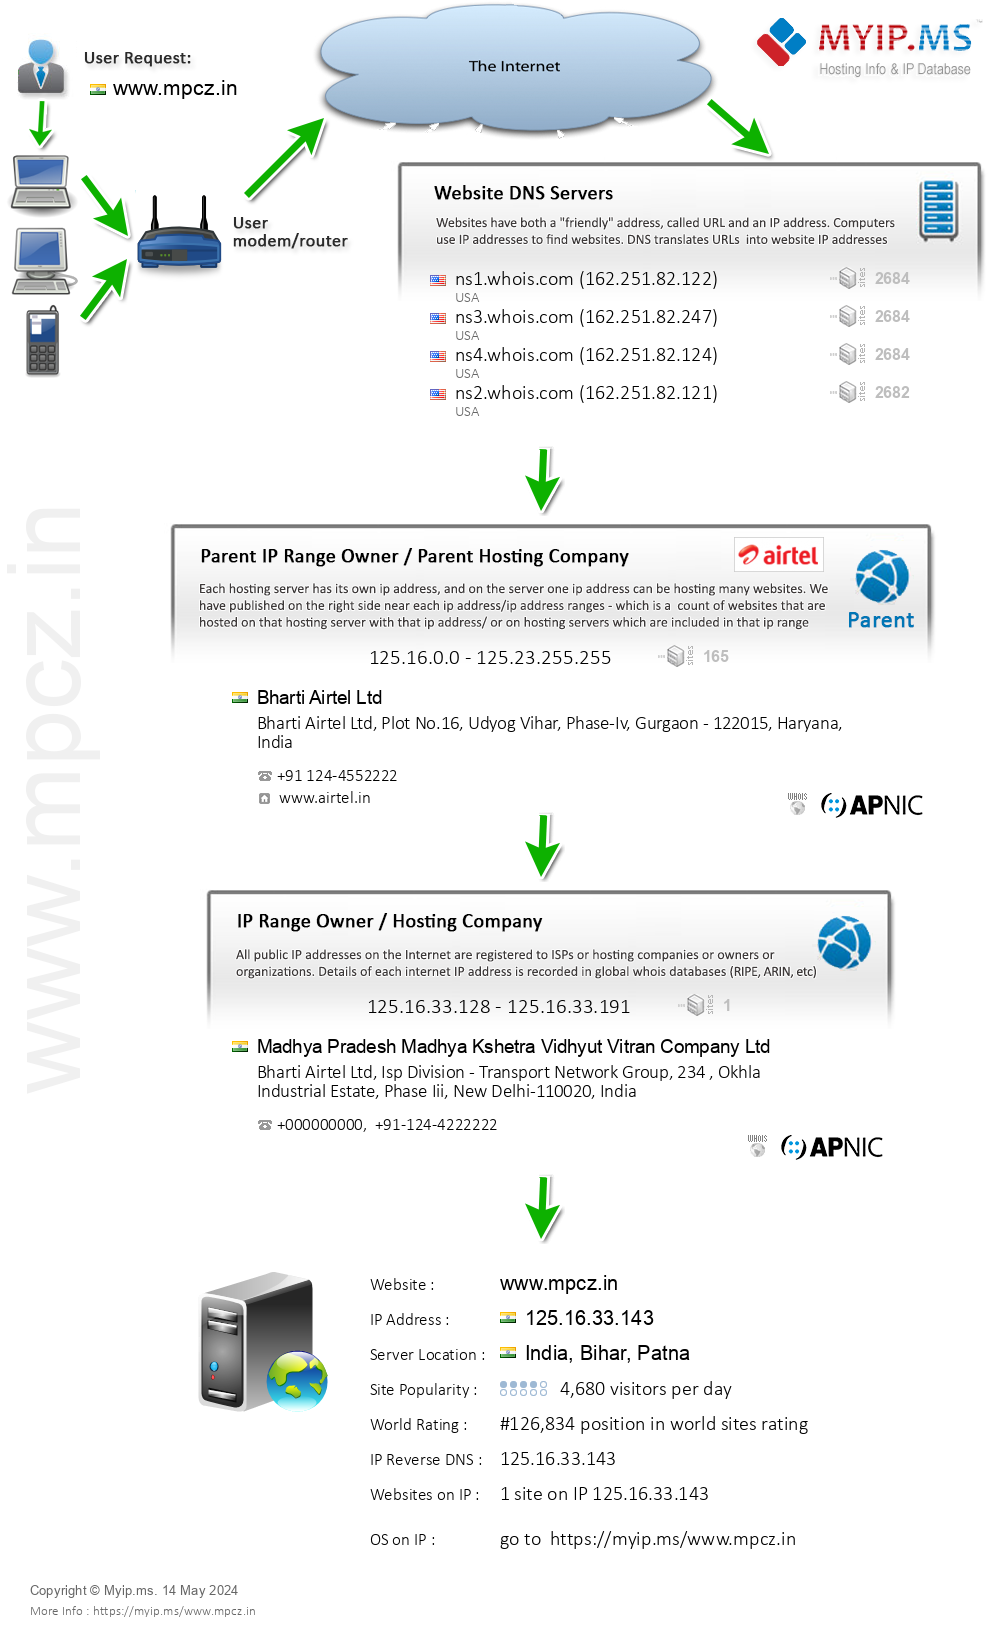 Mpcz.in - Website Hosting Visual IP Diagram